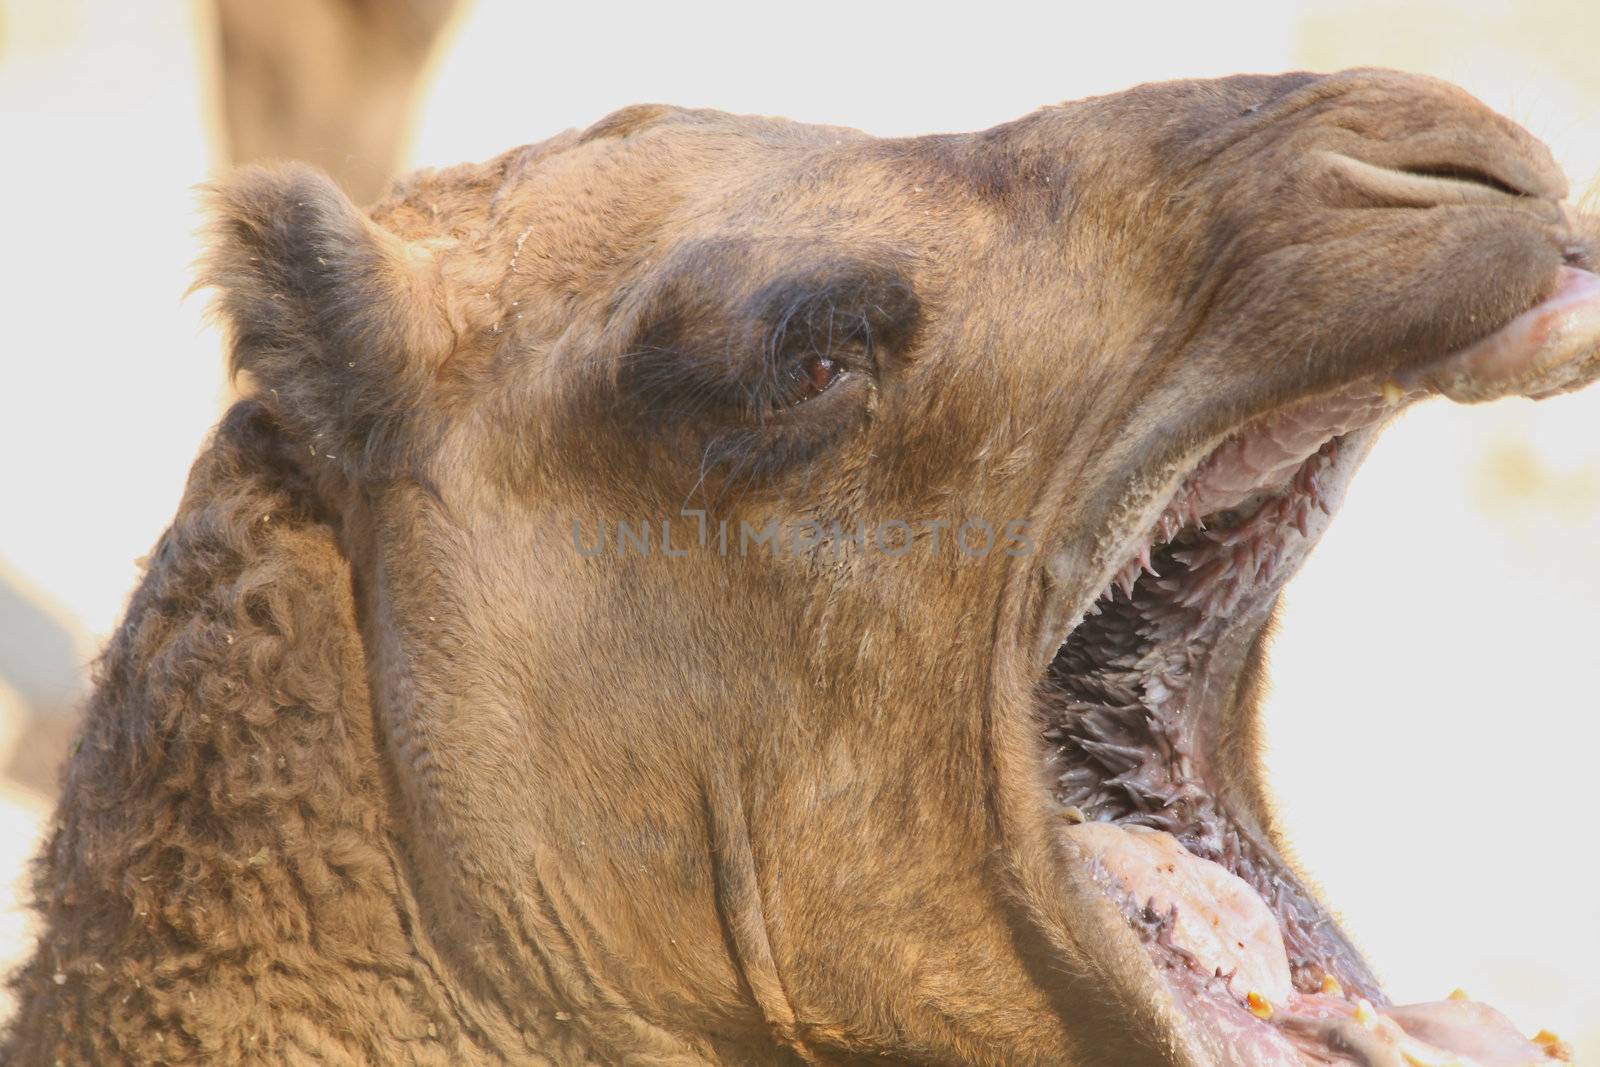 Close up of the camel's head.